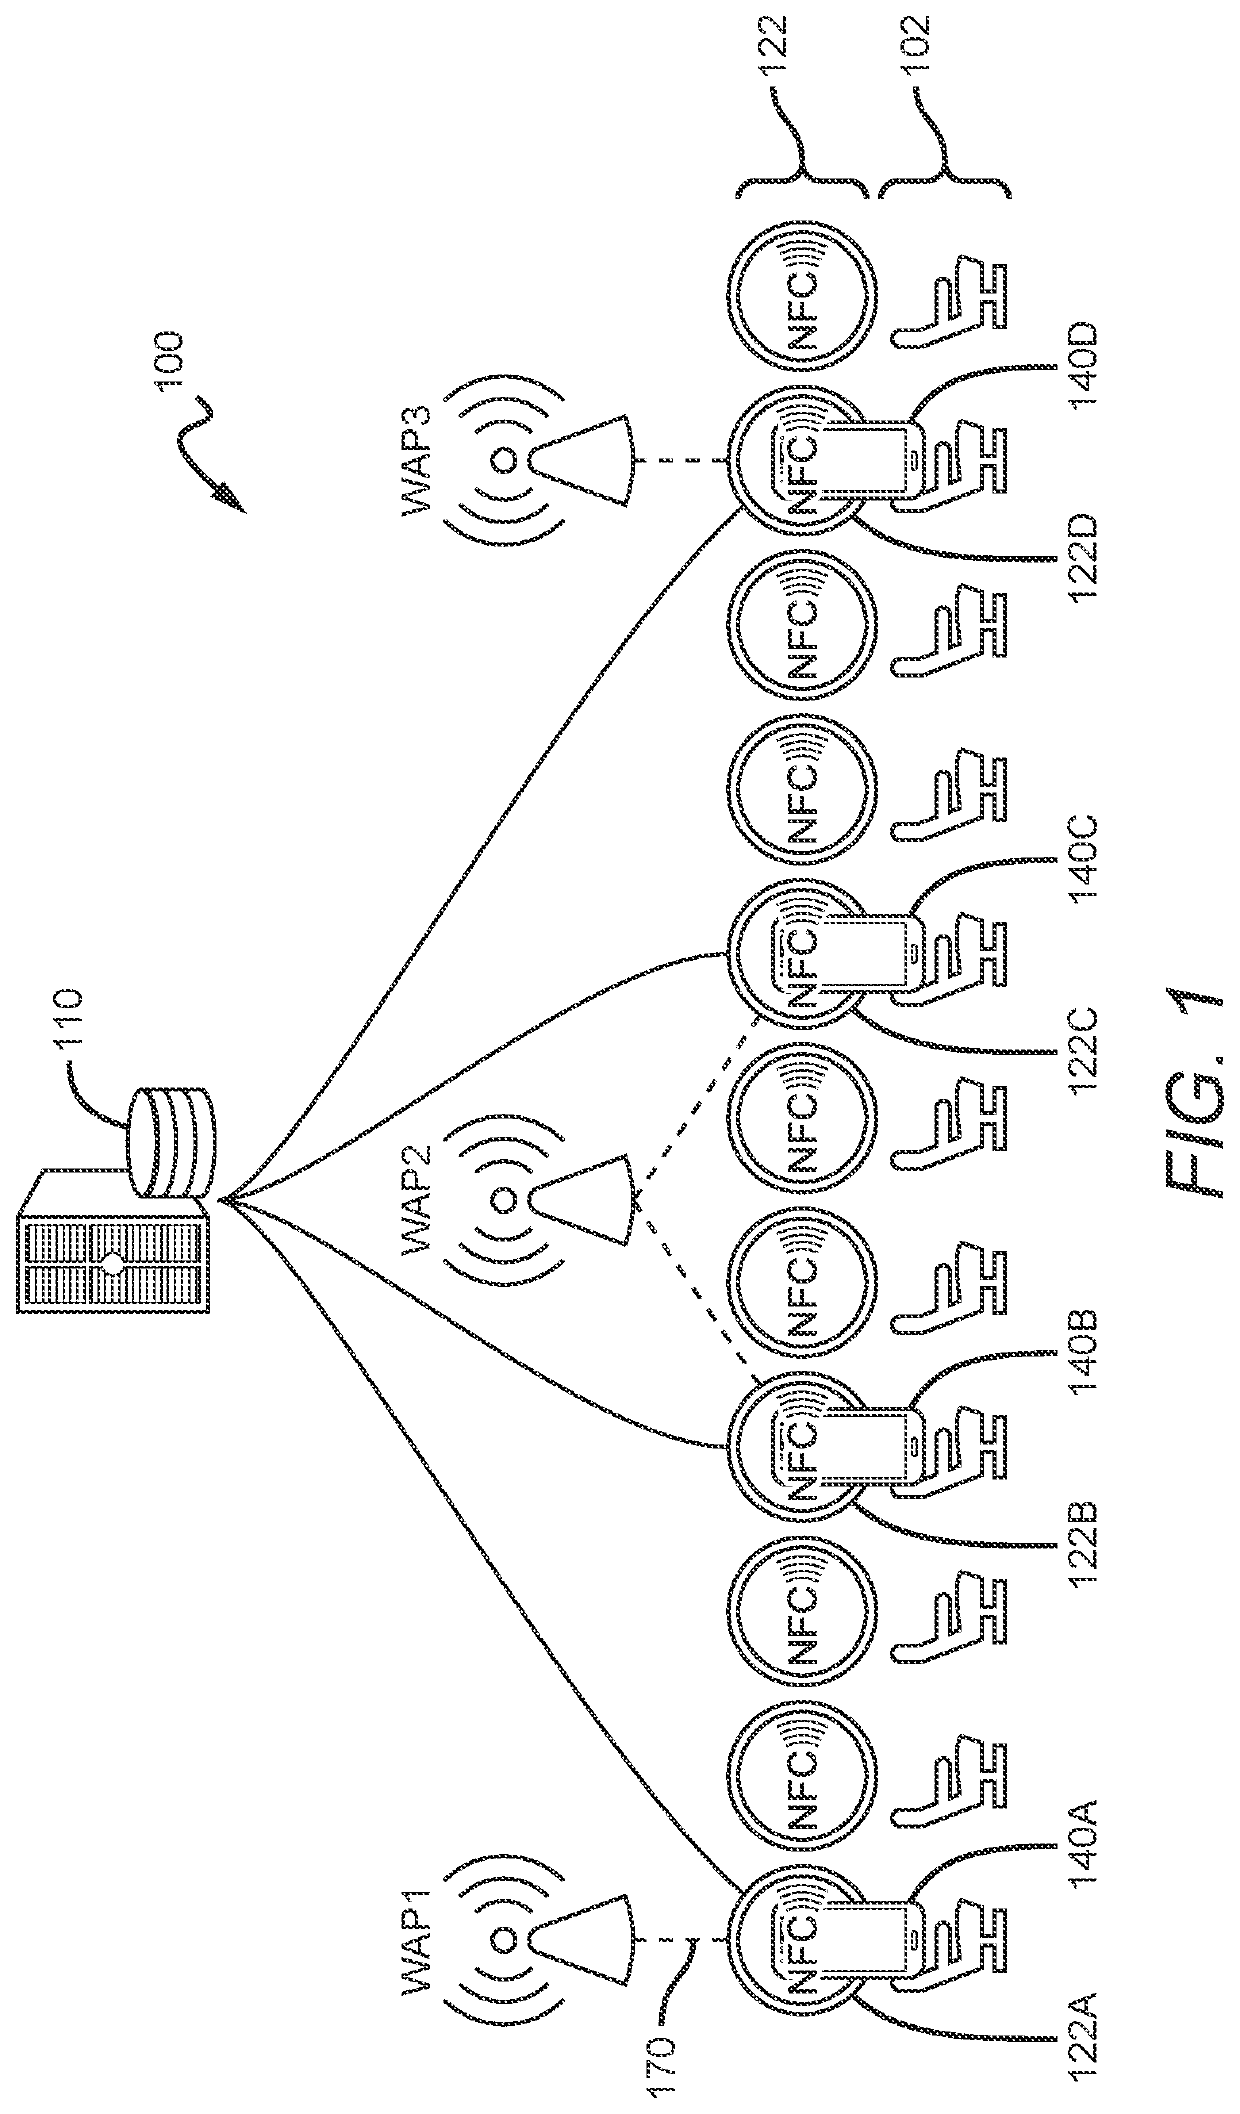 Systems and methods for steering wireless network traffic within a vehicle